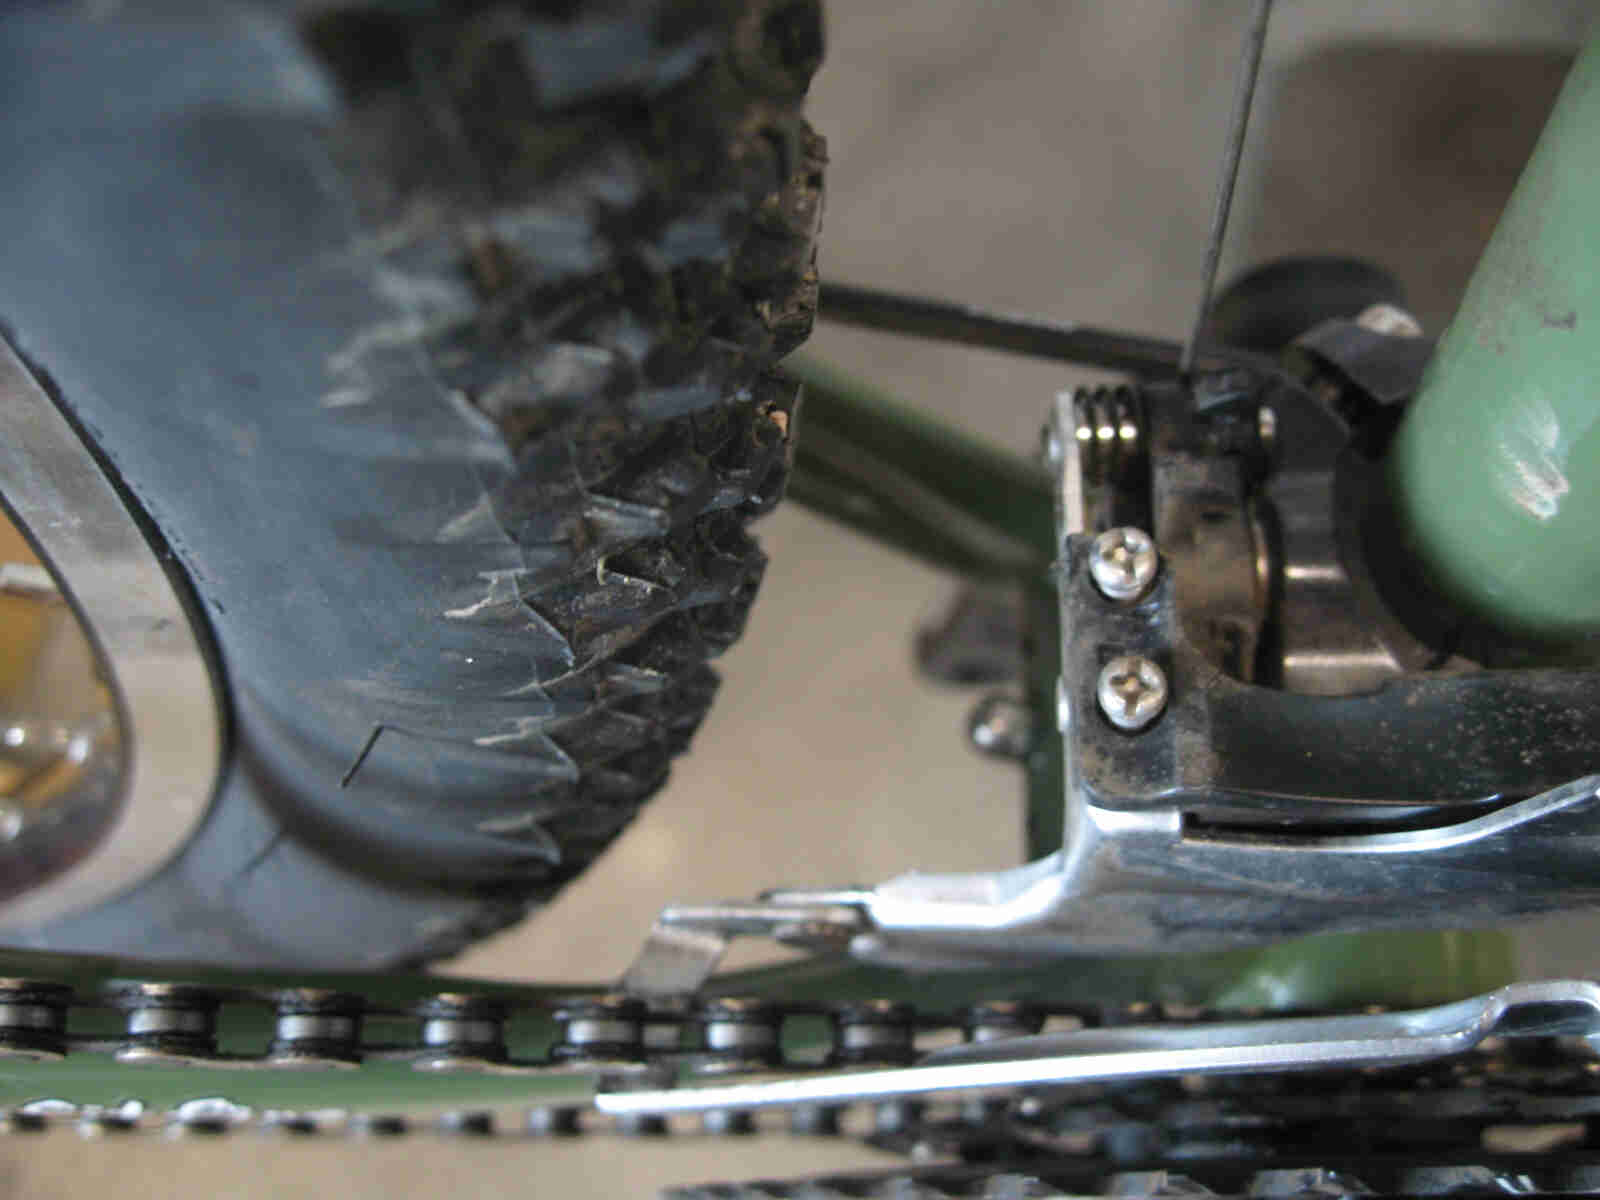 Surly Ogre bike - green -  crank and front derailleur detail - drive side close up view